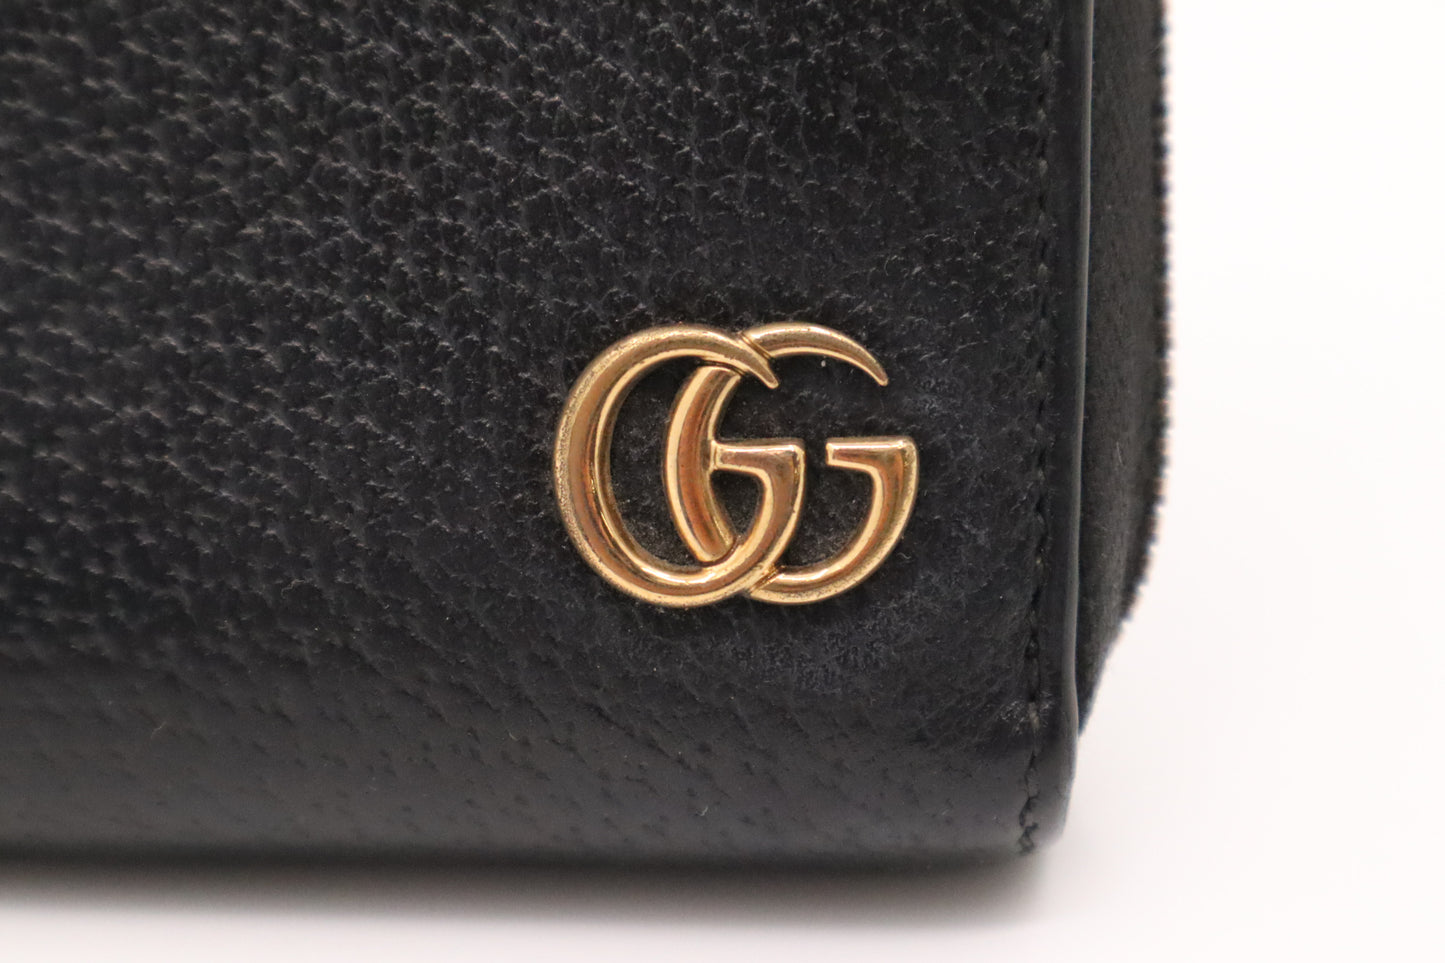 Gucci Long Wallet in Black Leather